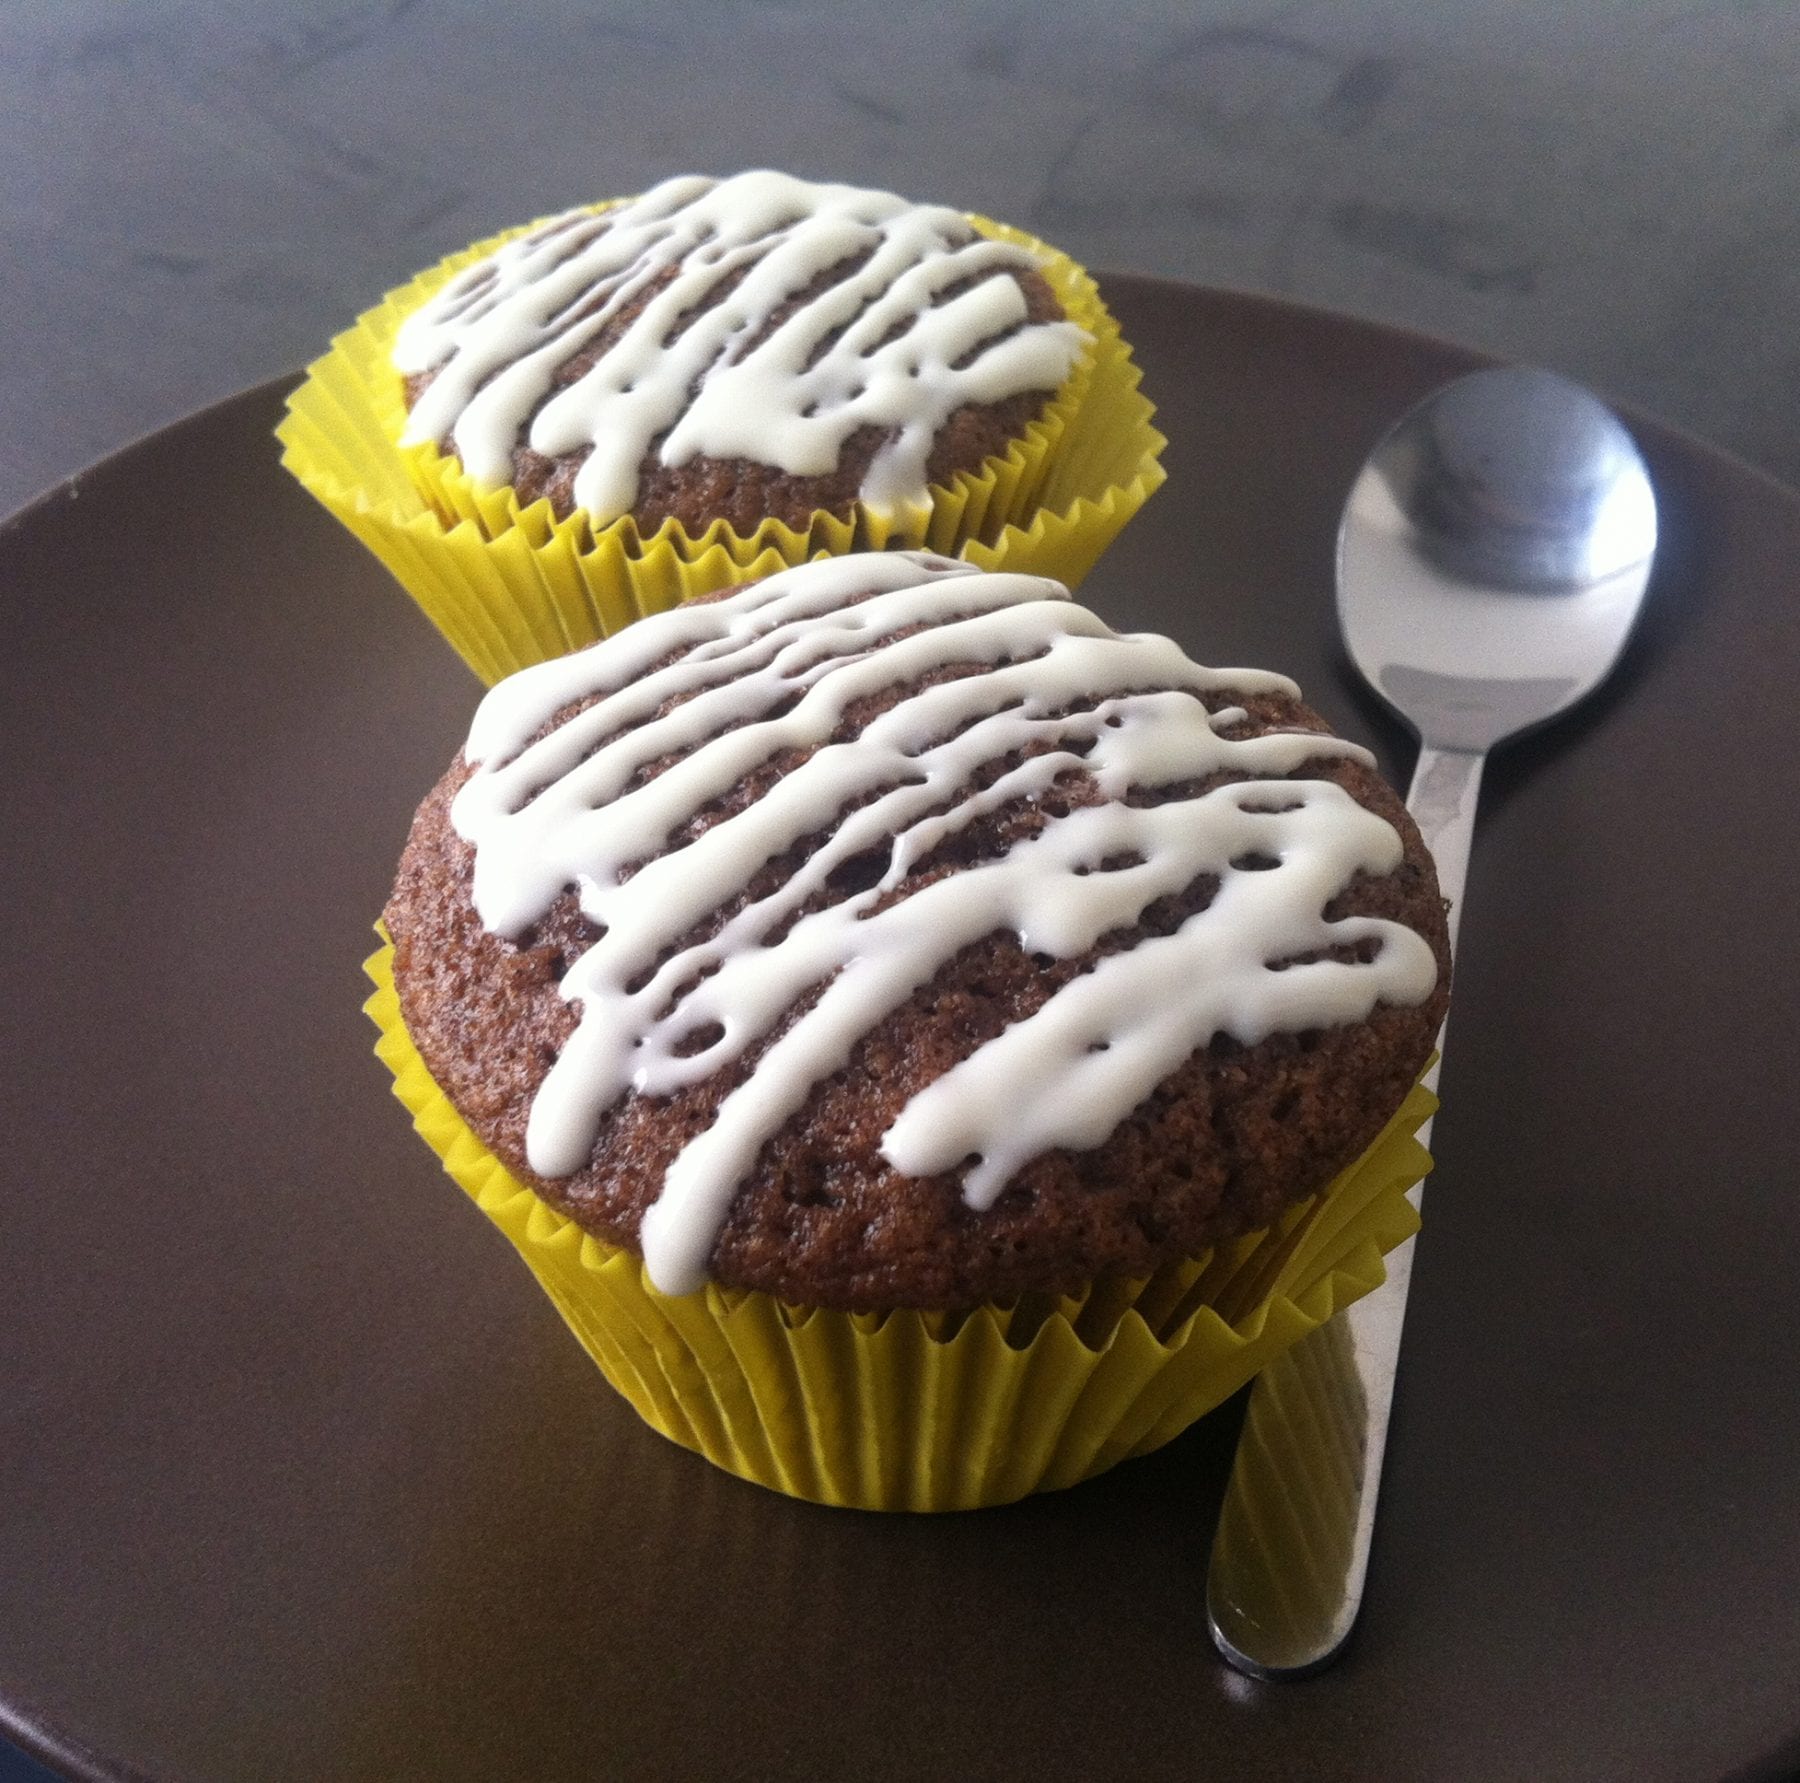 Chocolate Cupcake with White Chocolate Frosting